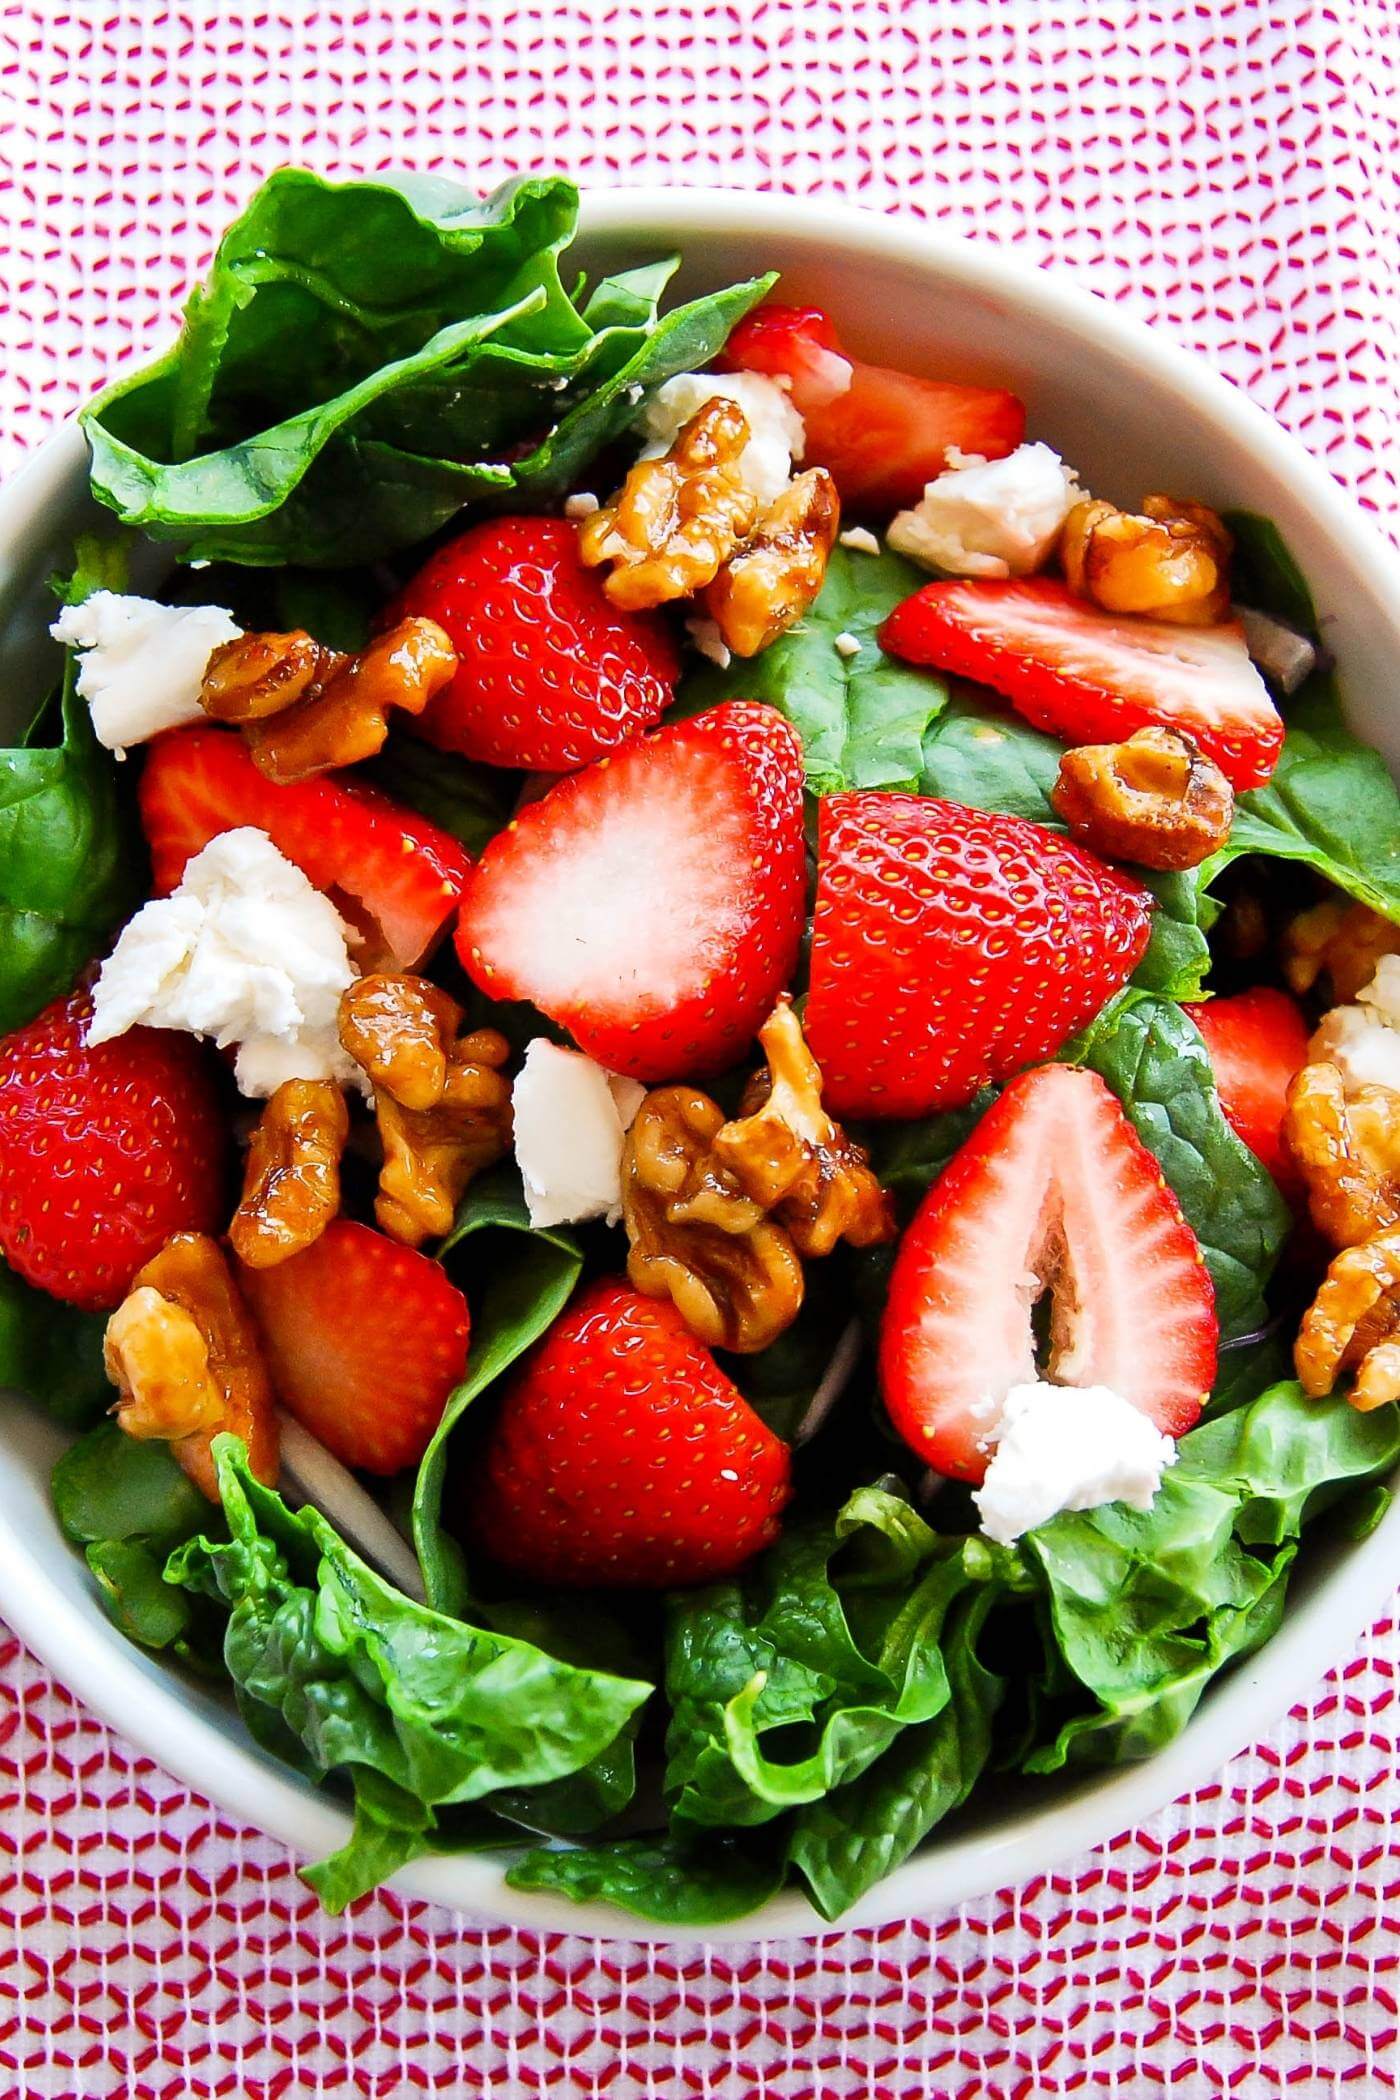 spinach and strawberry salad with goat cheese and candied walnuts in bowl.